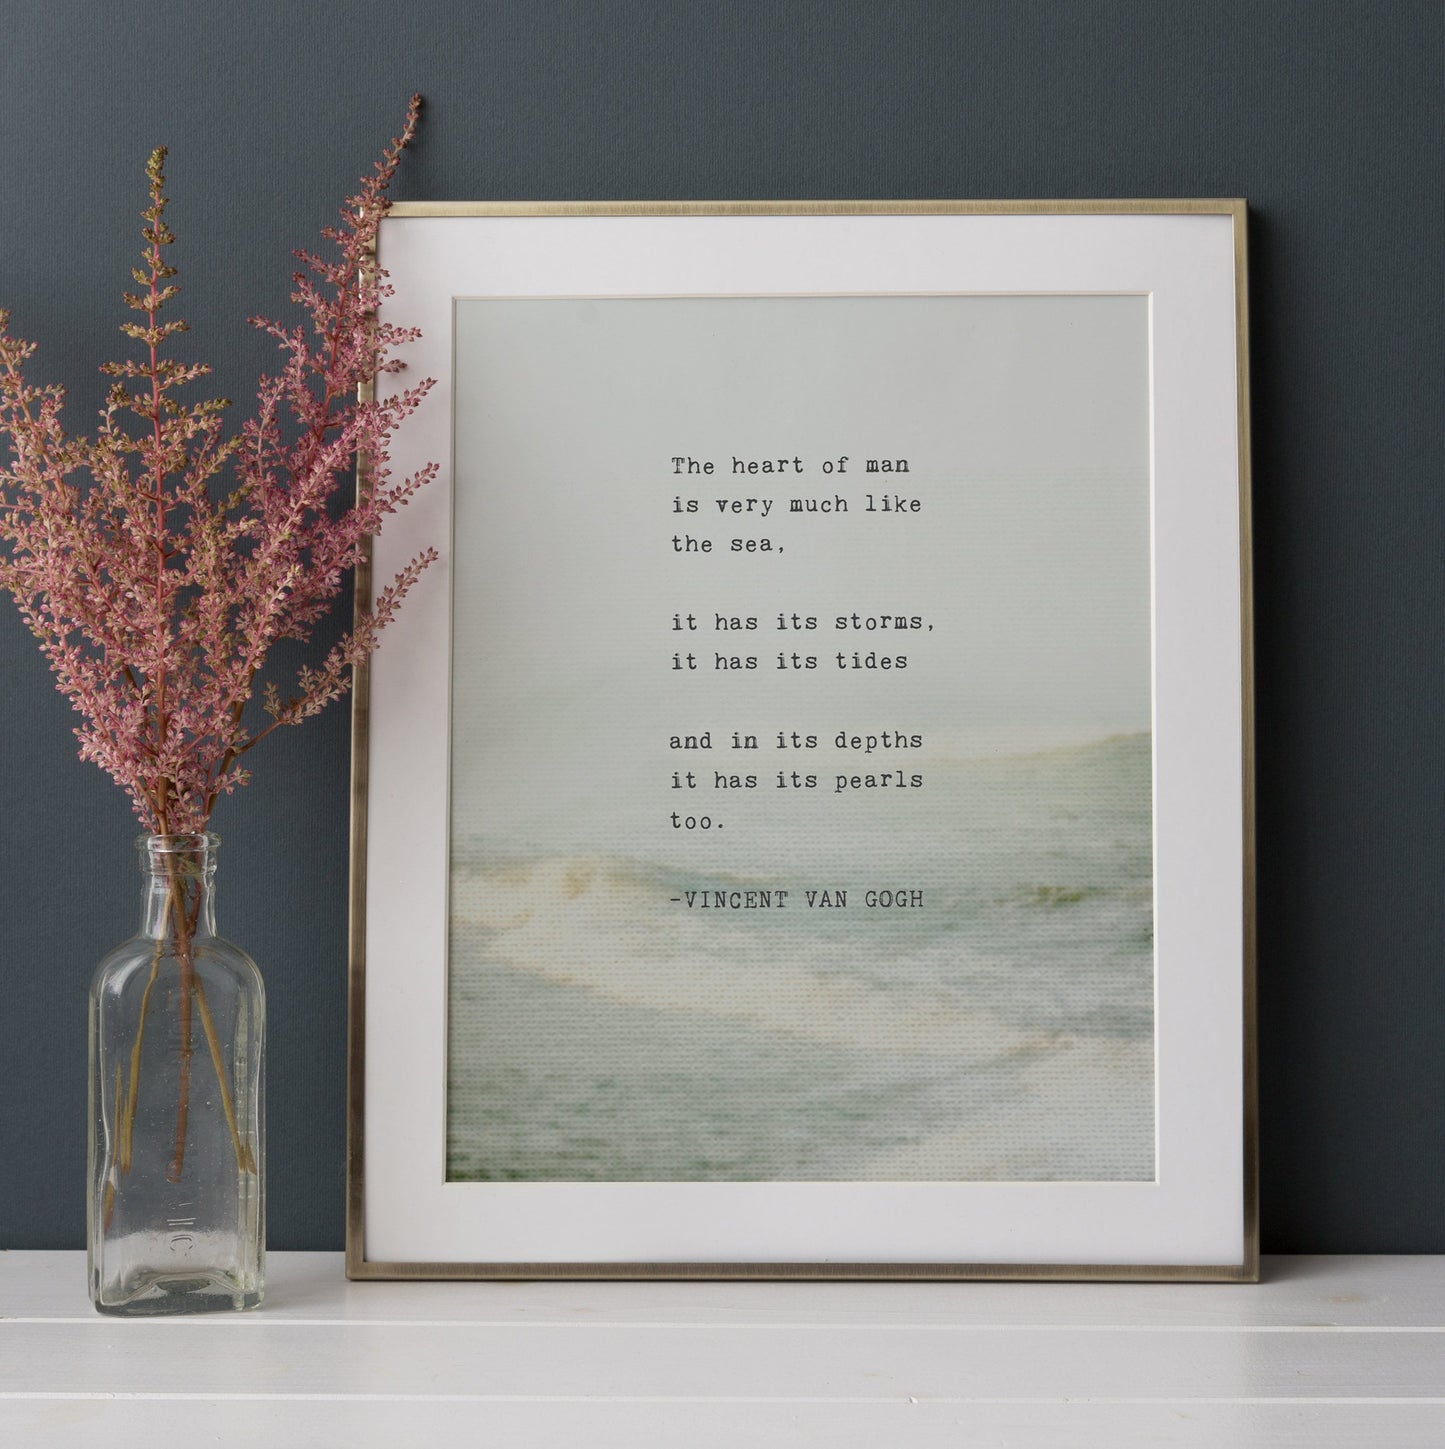 Vincent Van Gogh quote poster "The heart of man is much like the sea..."